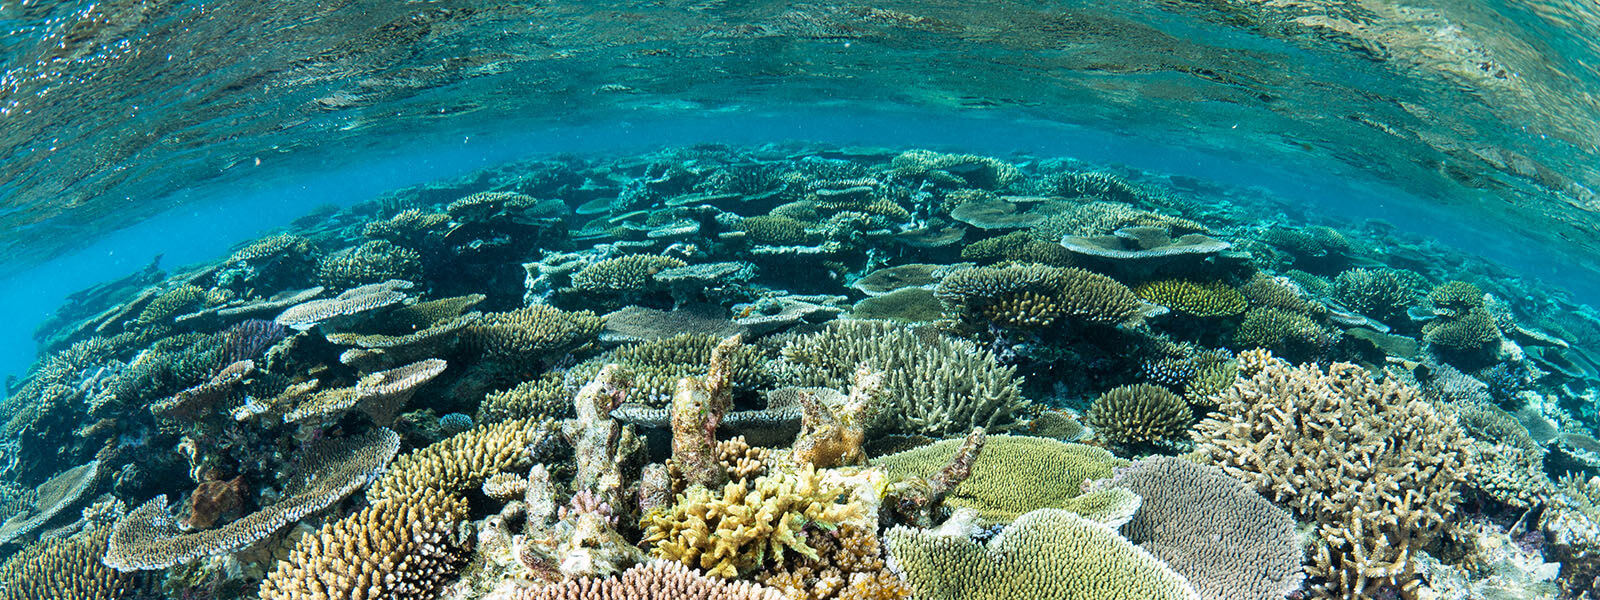 We snorkel over healthy coral reefs on our Fiji snorkeling tour